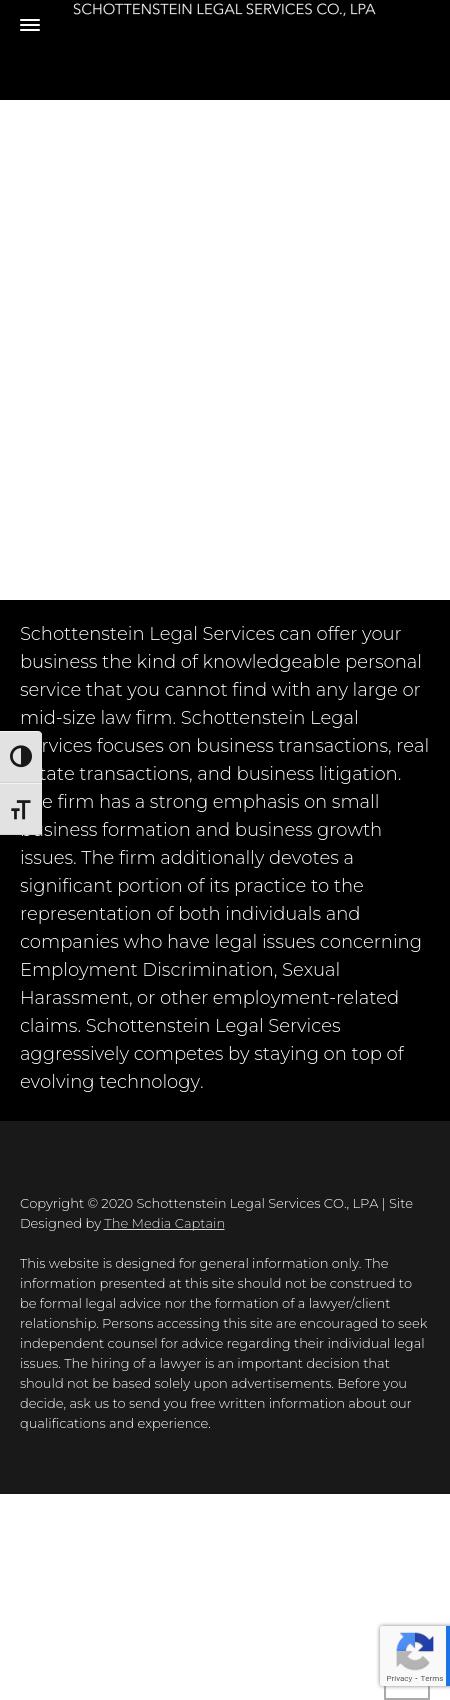 Schottenstein Legal Services Co., LPA - Columbus OH Lawyers